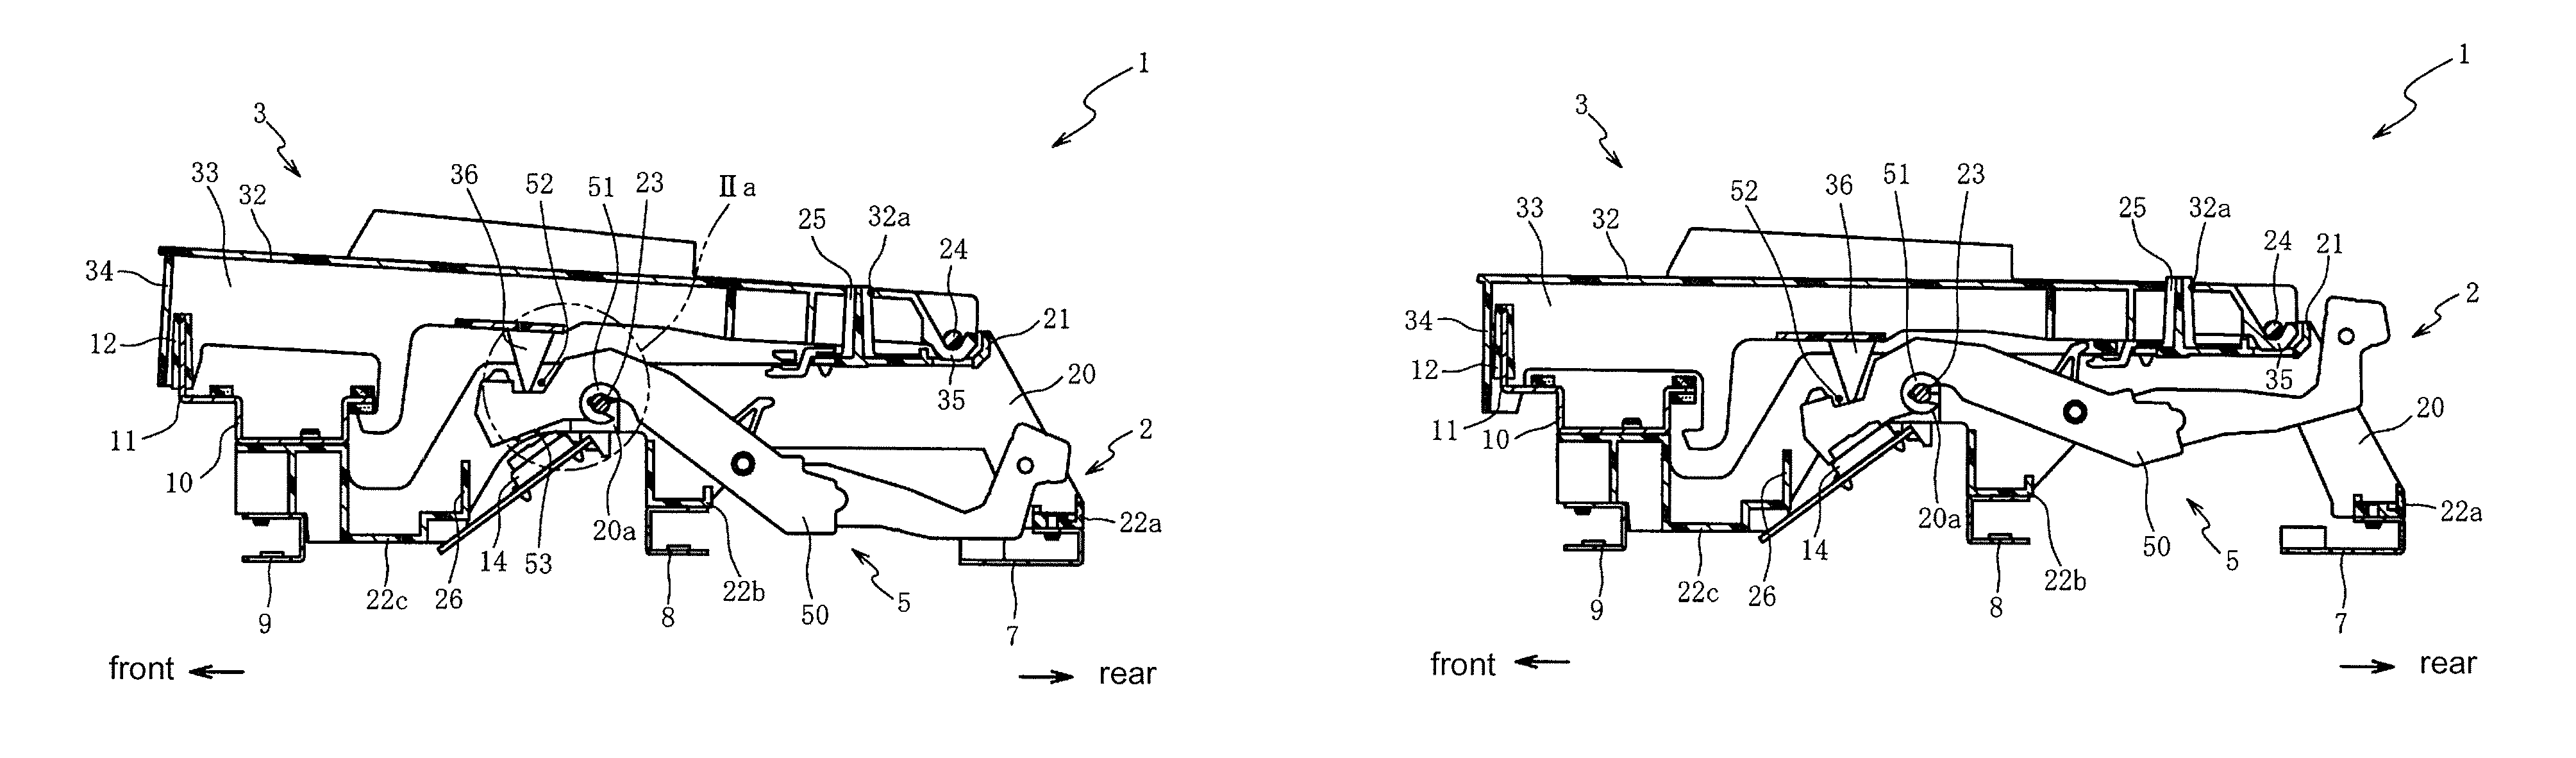 Keyboard device of electronic musical instrument